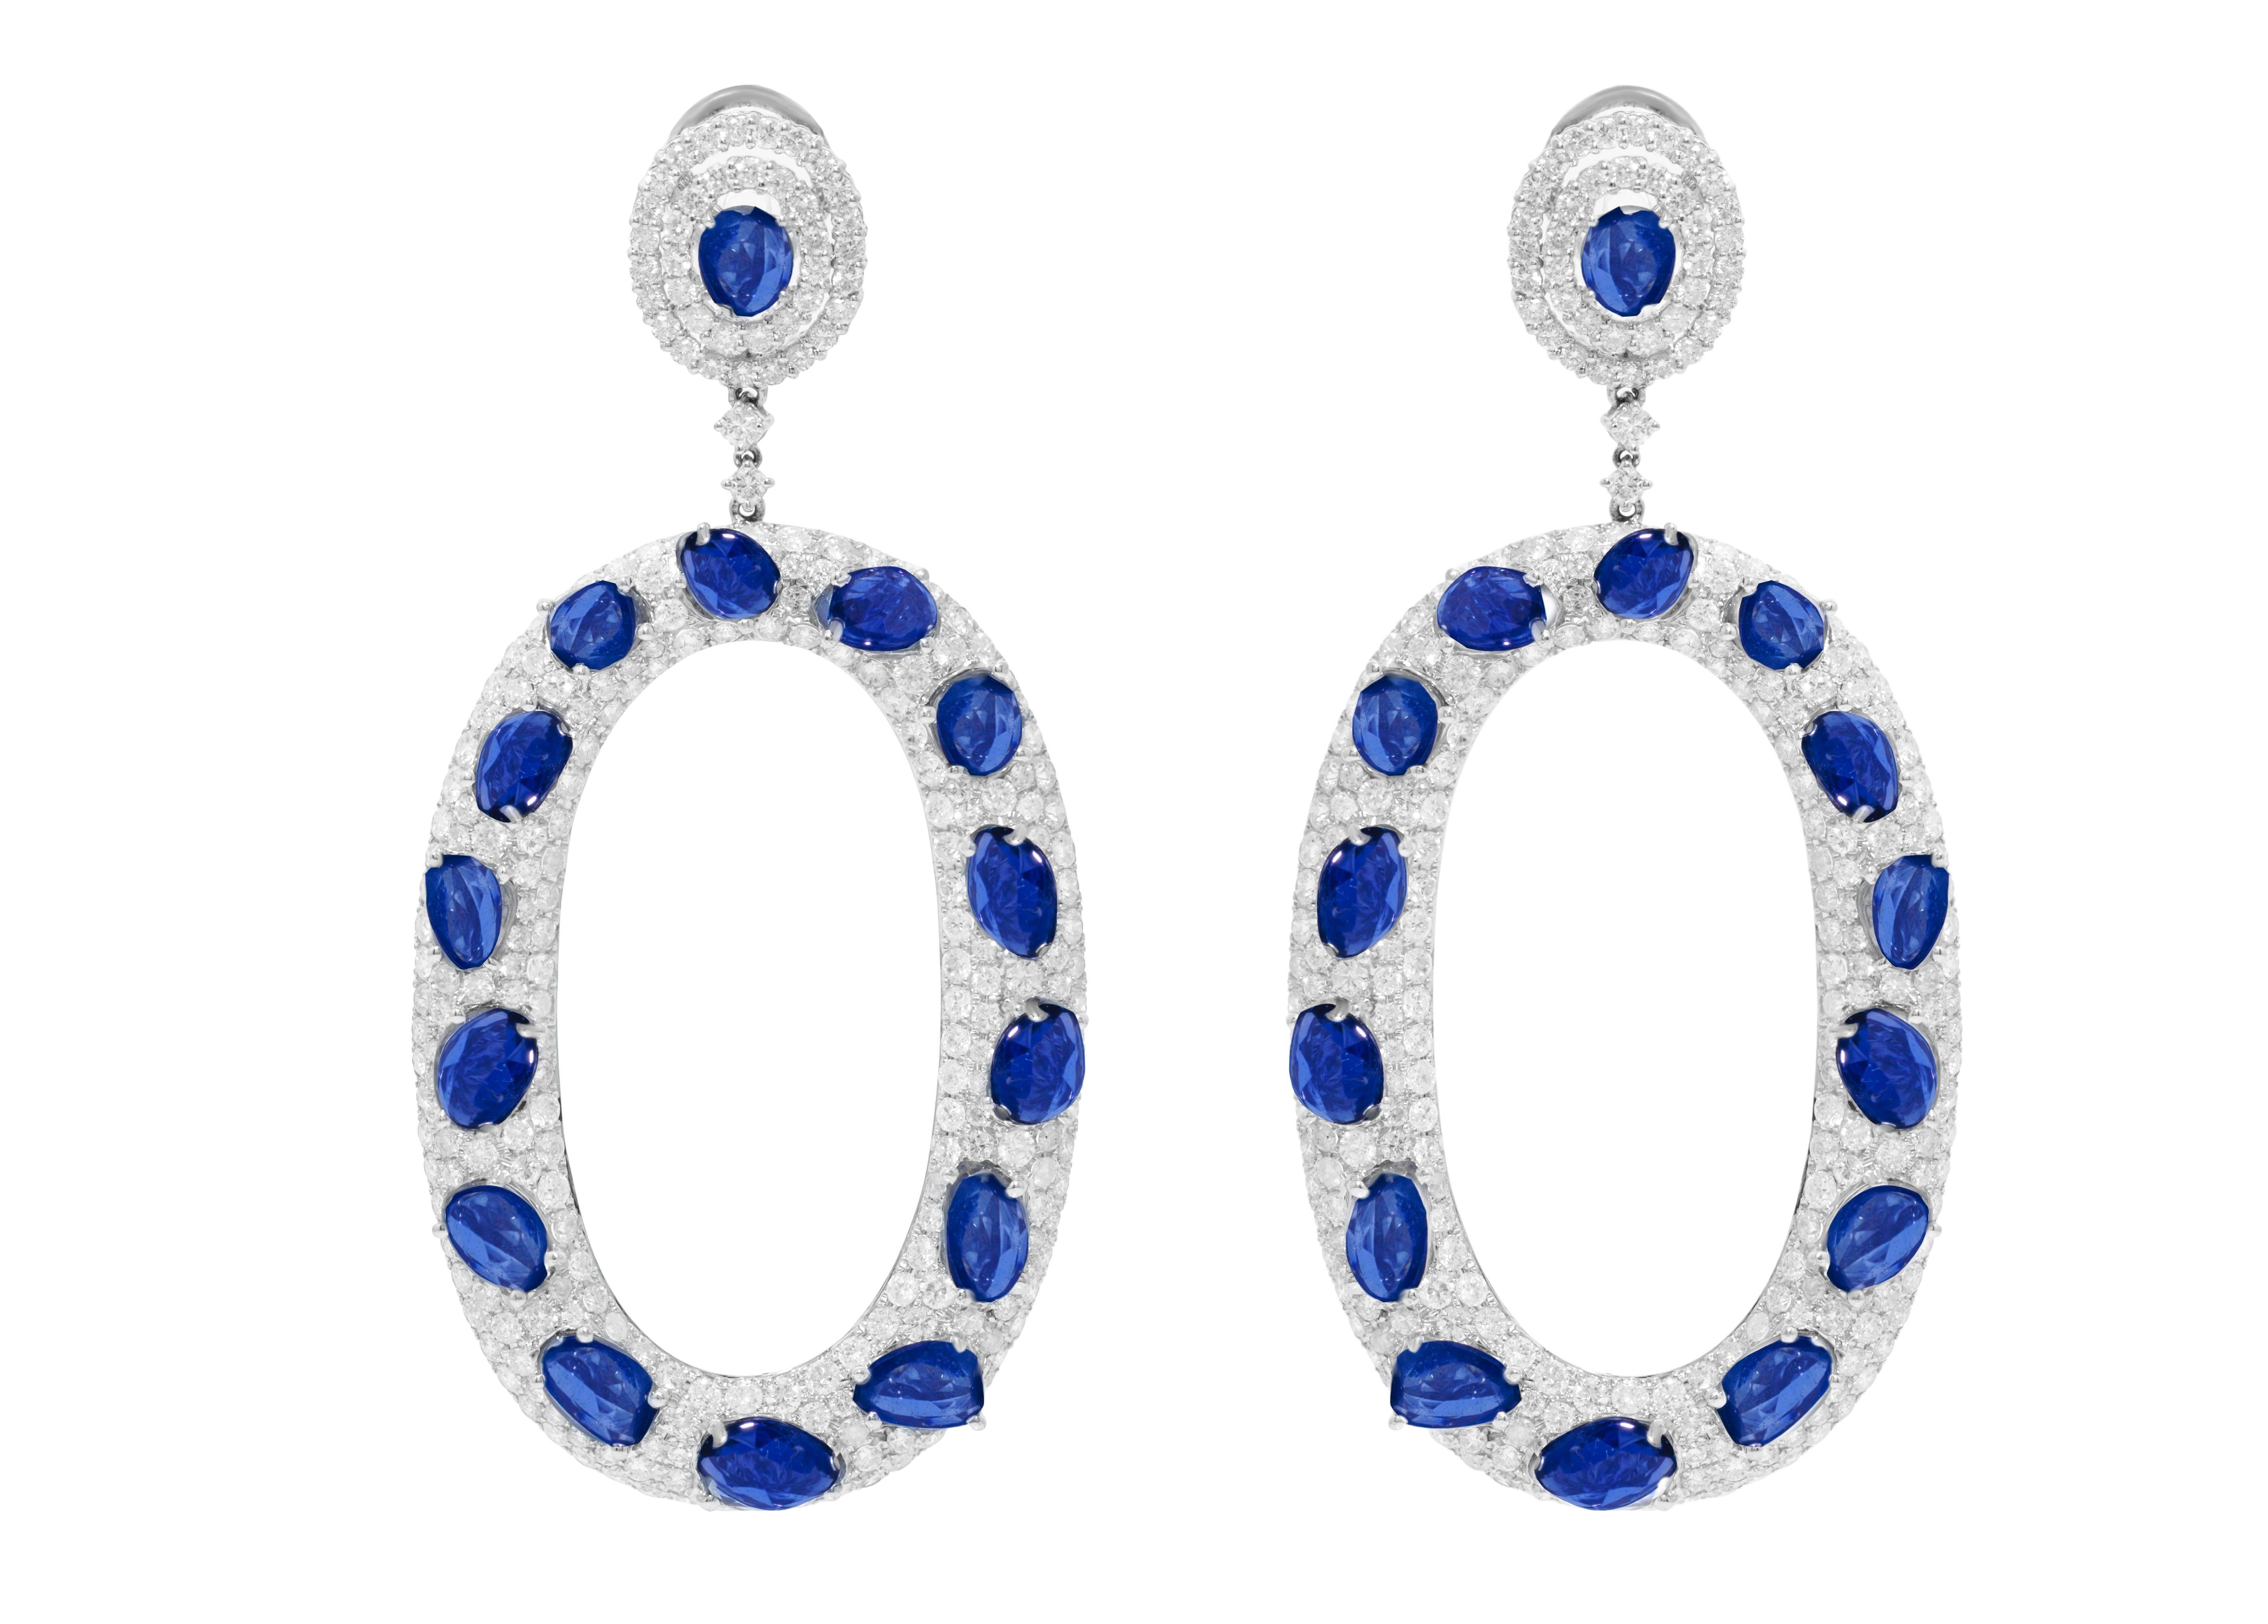 18kt white gold bagel fashion sapphire and diamond earrings, features 20.14 carats of sapphires. 11.13 carats of diamonds